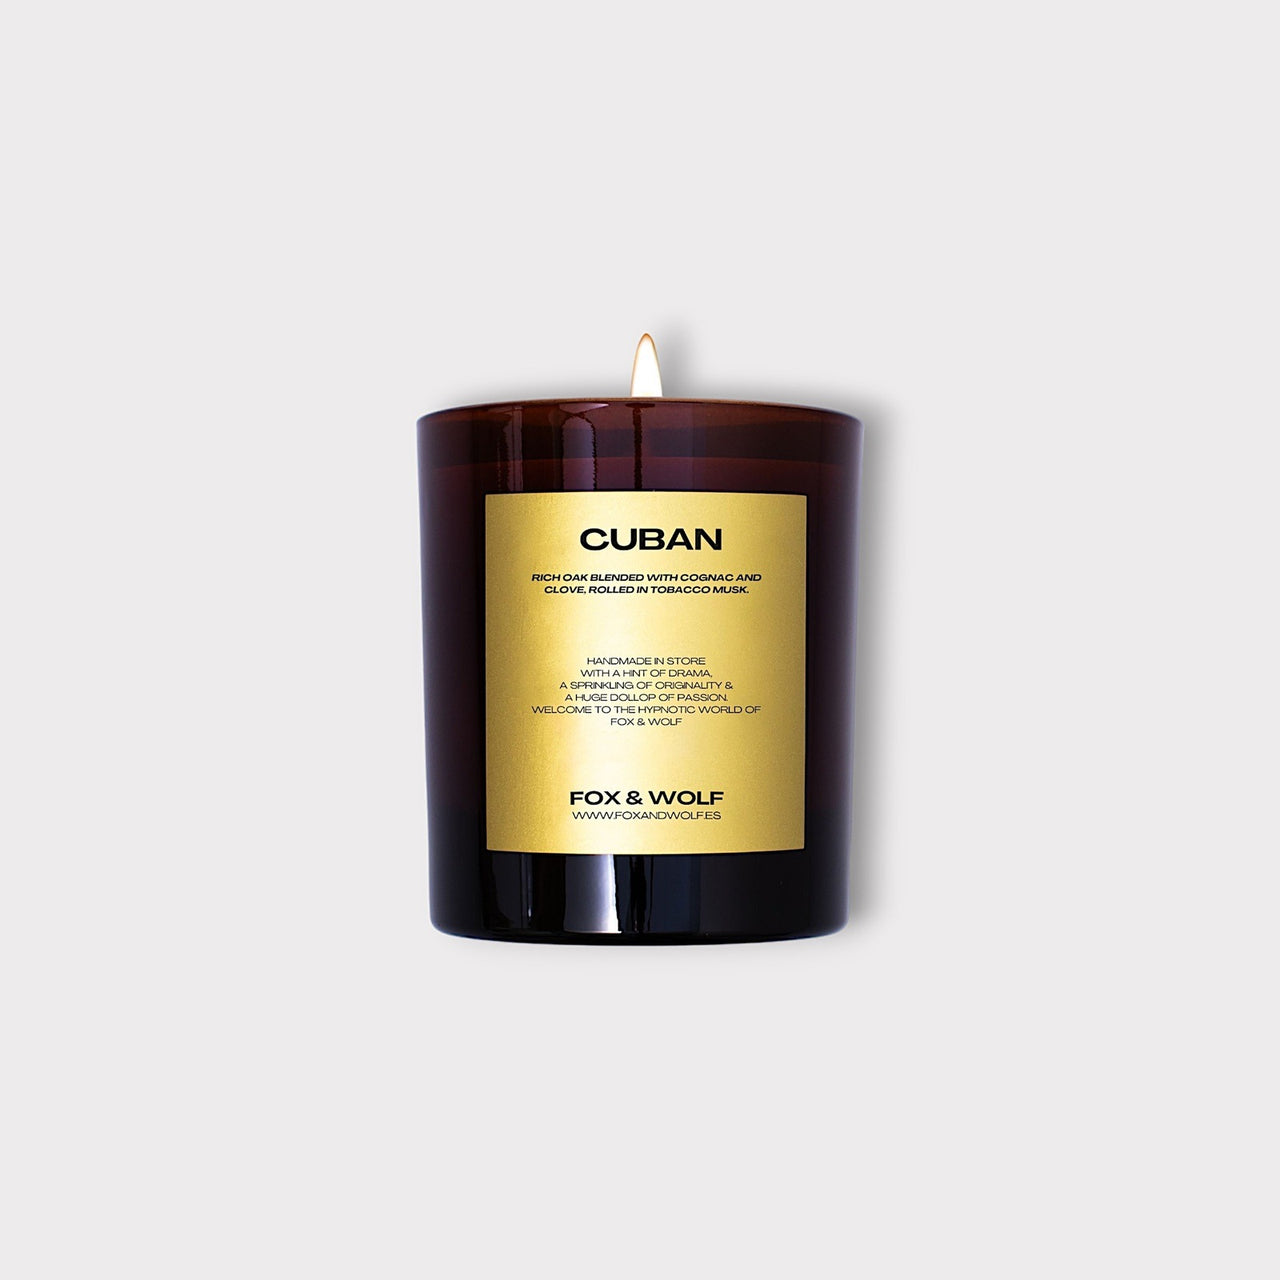 300 G CUBAN SCENTED CANDLE